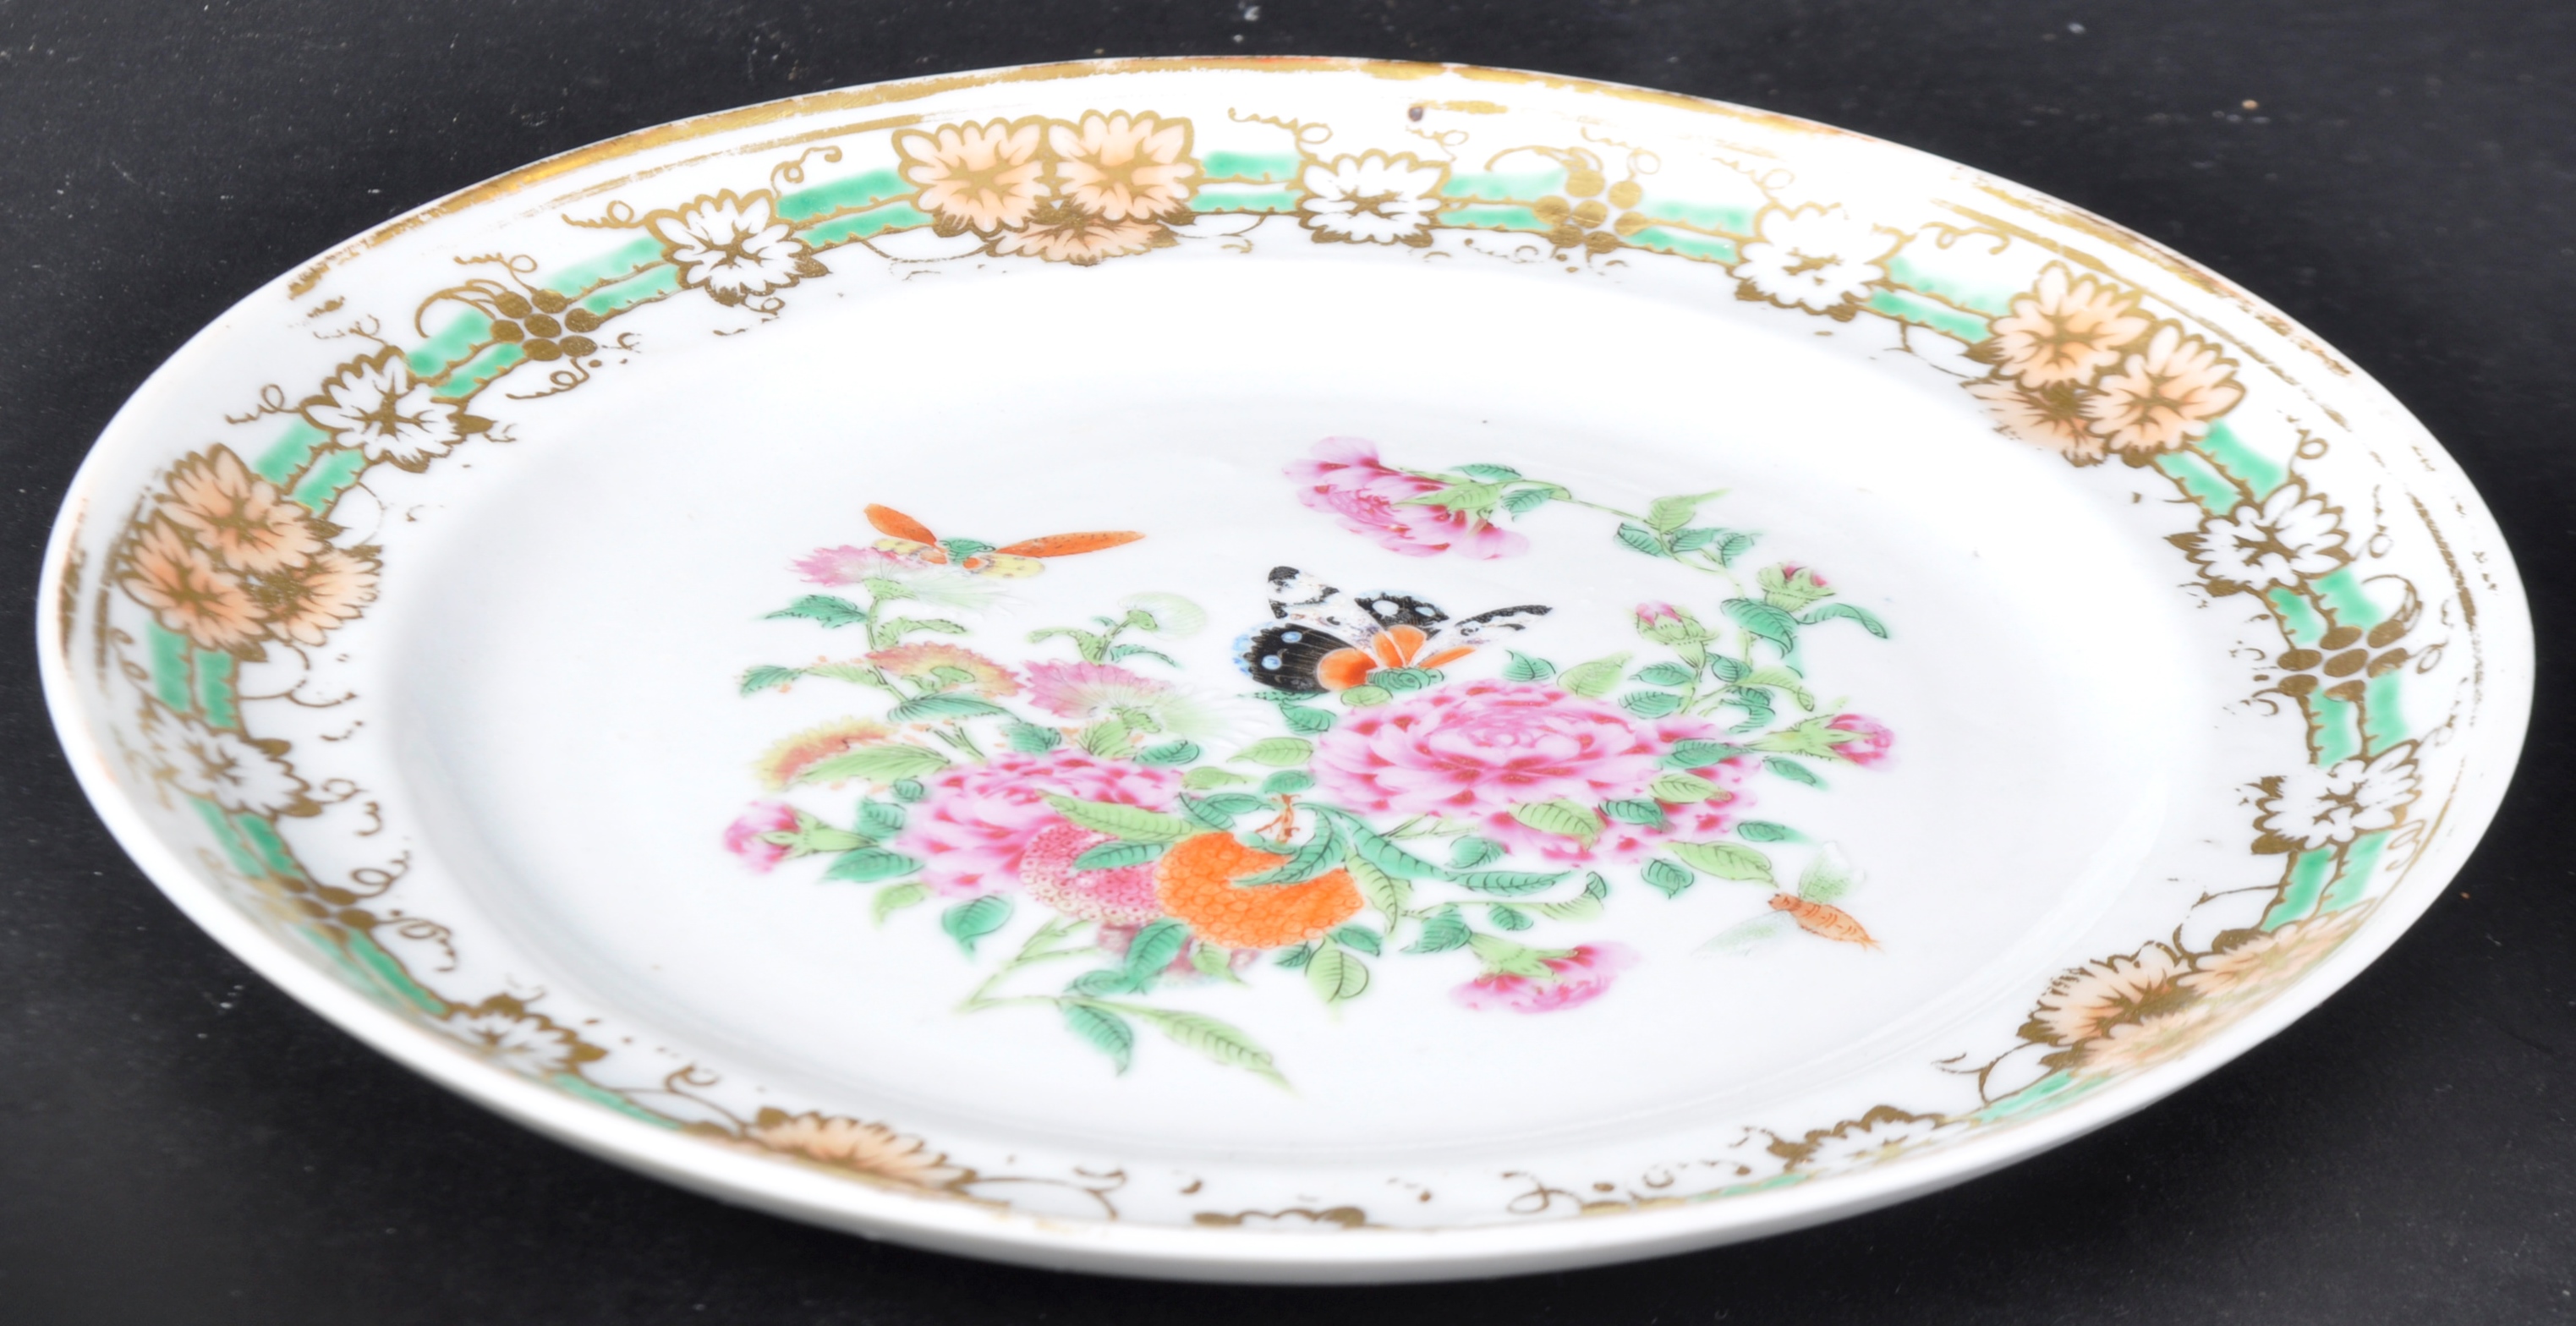 19TH CENTURY CHINESE CANTONESE PORCELAIN PLATE - Image 2 of 2